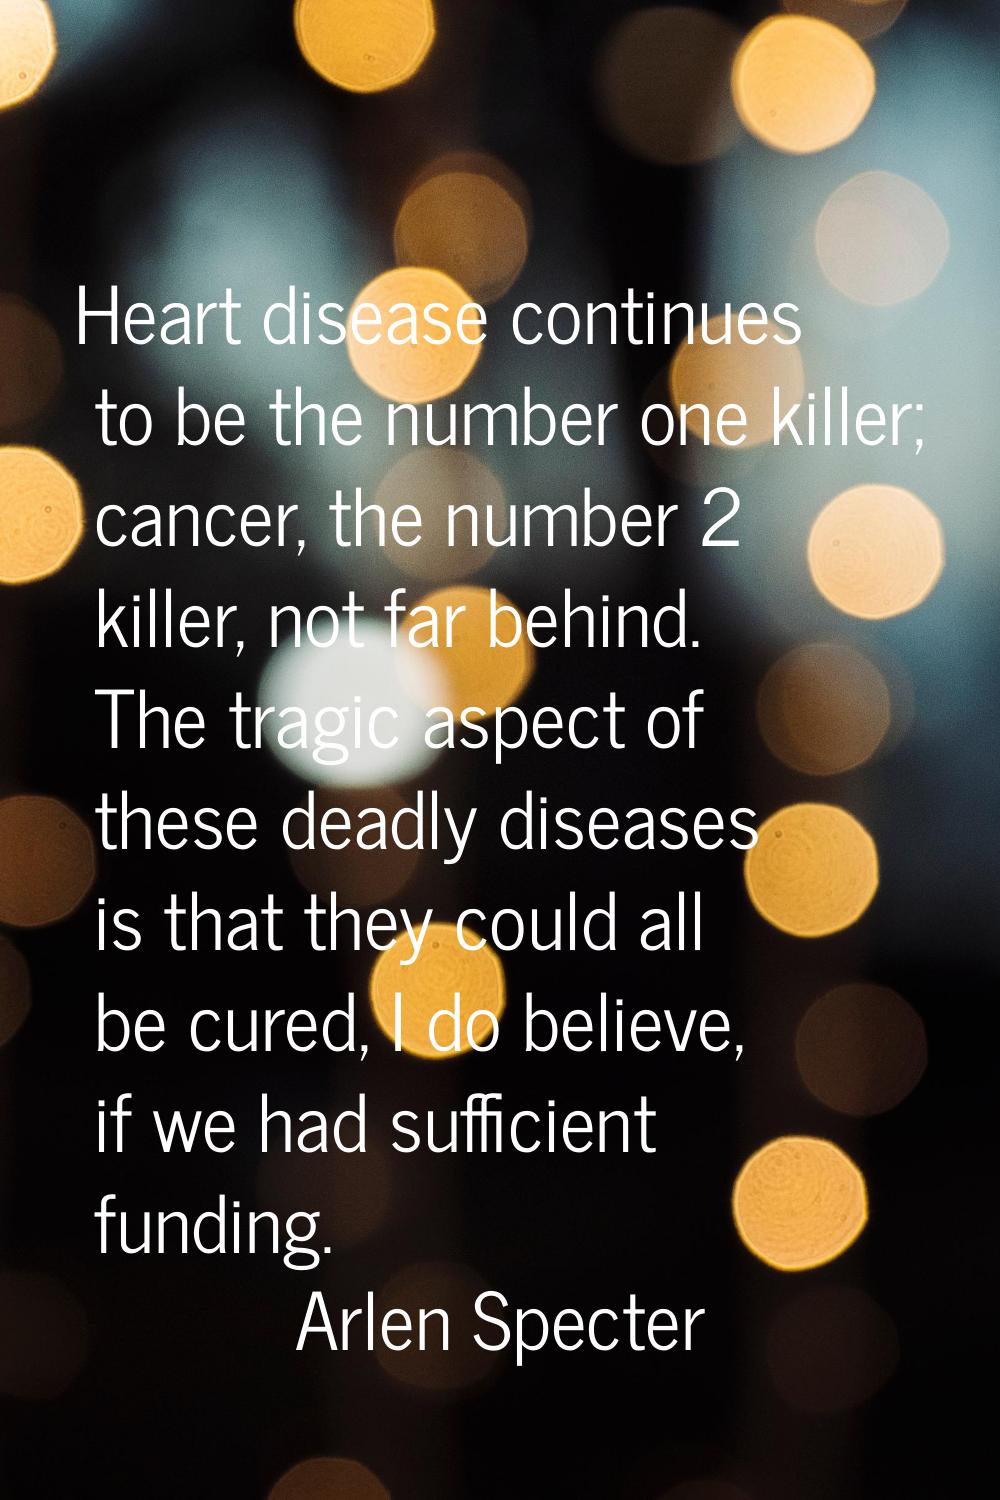 Heart disease continues to be the number one killer; cancer, the number 2 killer, not far behind. T